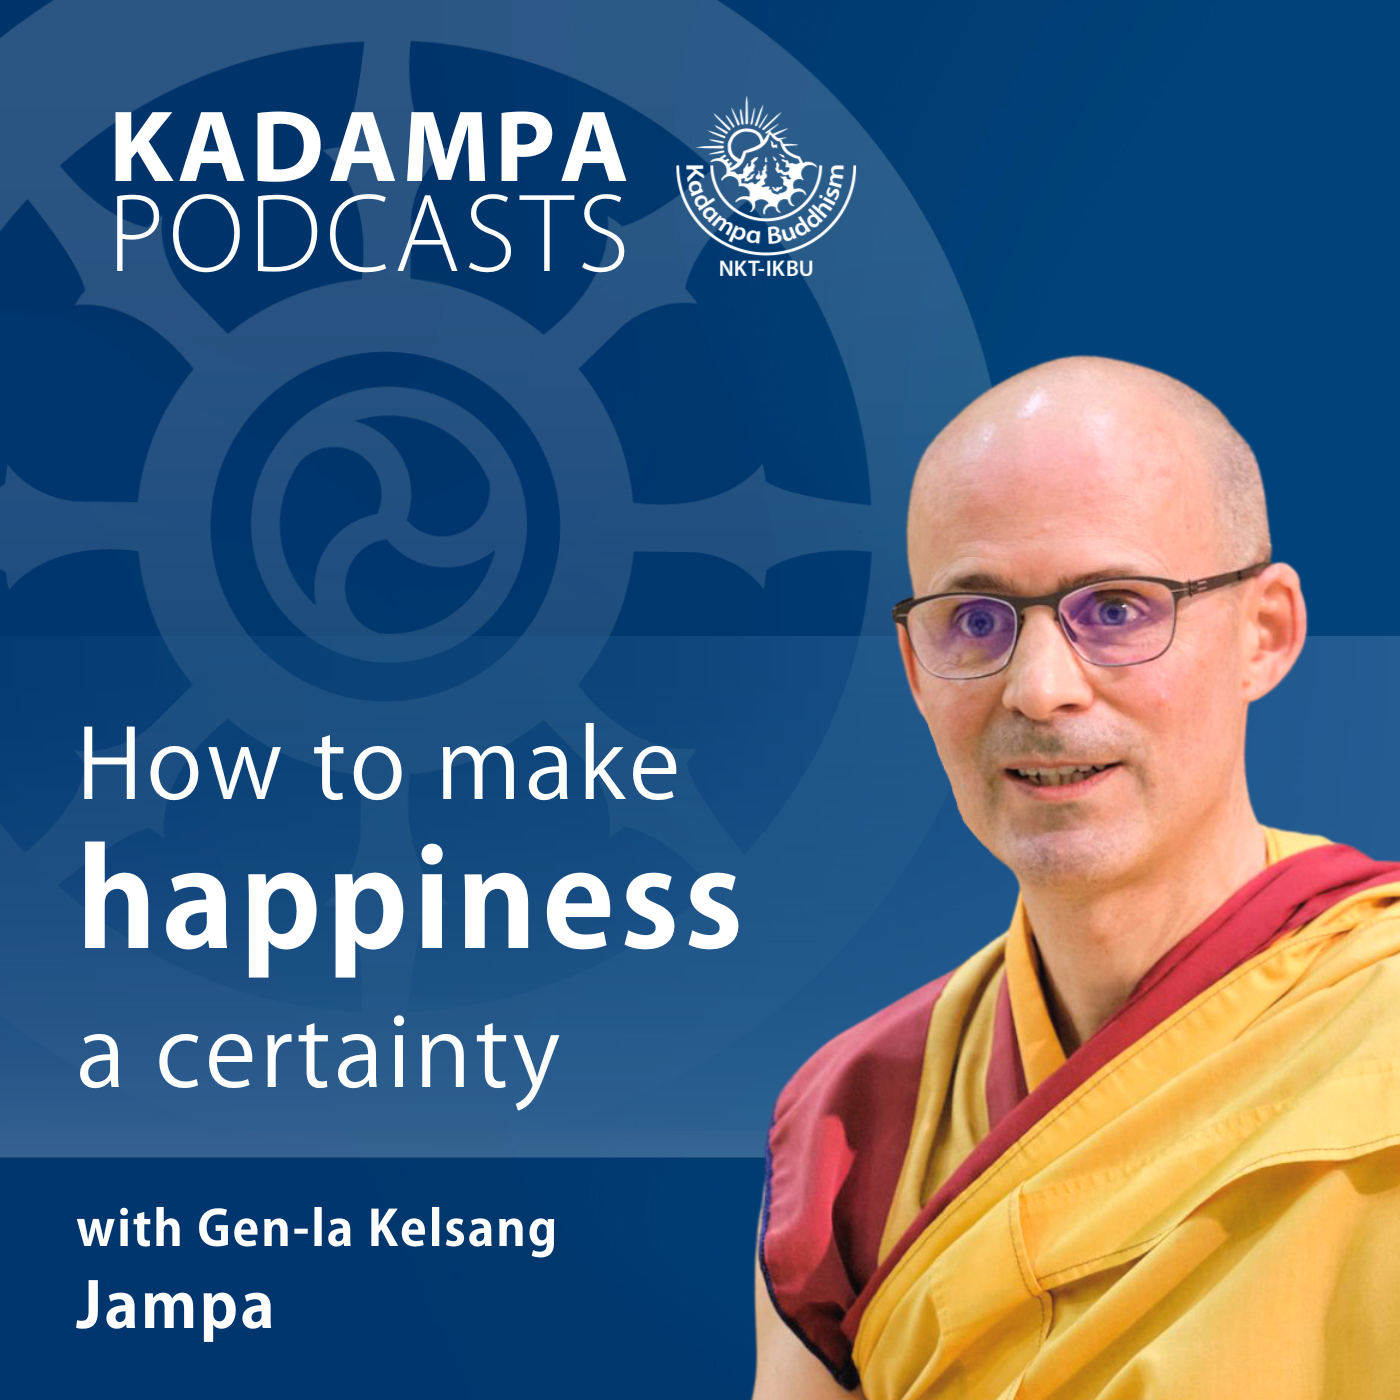 How to make happiness a certainty